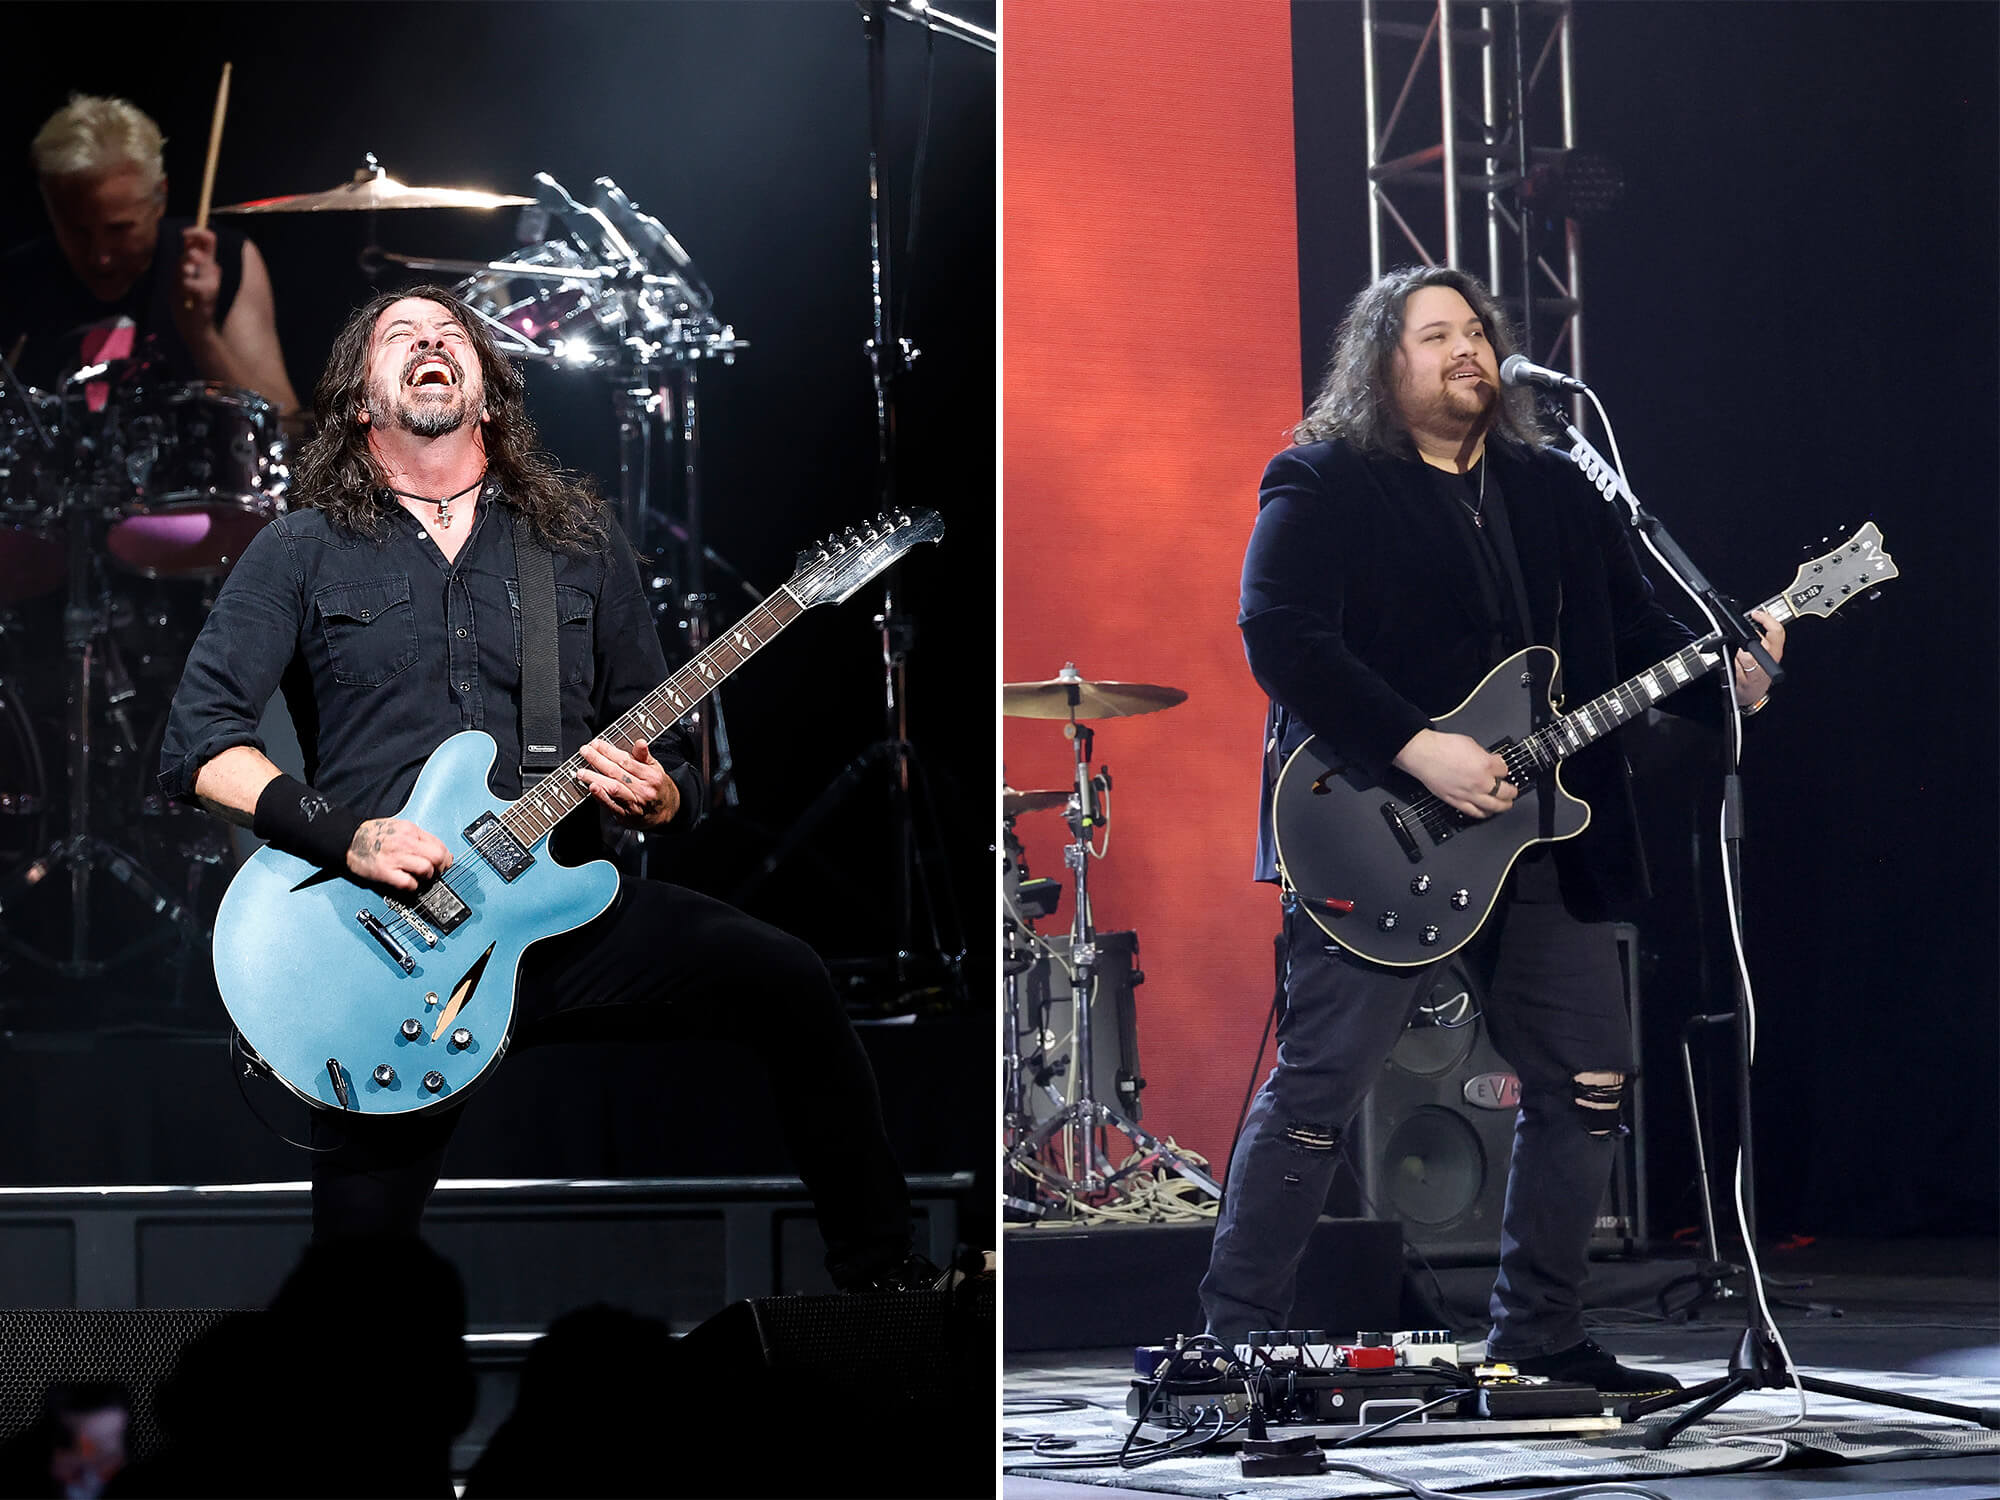 Dave Grohl (left) pictured laughing and playing guitar on stage. Wolfgang Van Halen (right) on stage, with guitar in hand, singing into a mic.